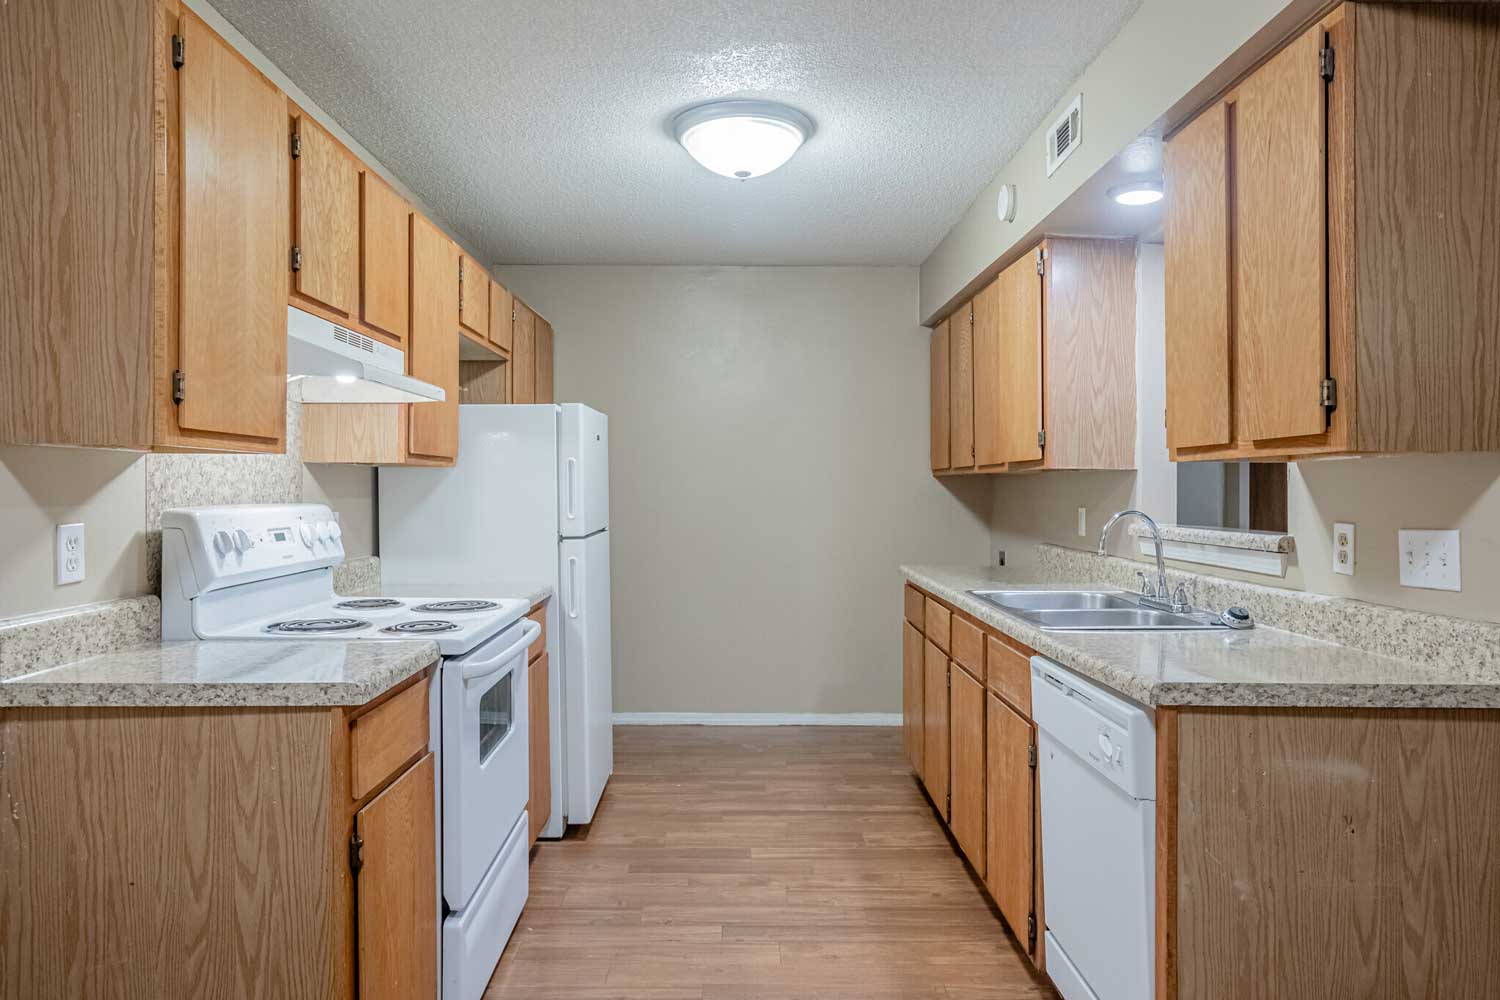 Fully Equipped Kitchen at Crown Ridge Apartments in Fayetteville, AR